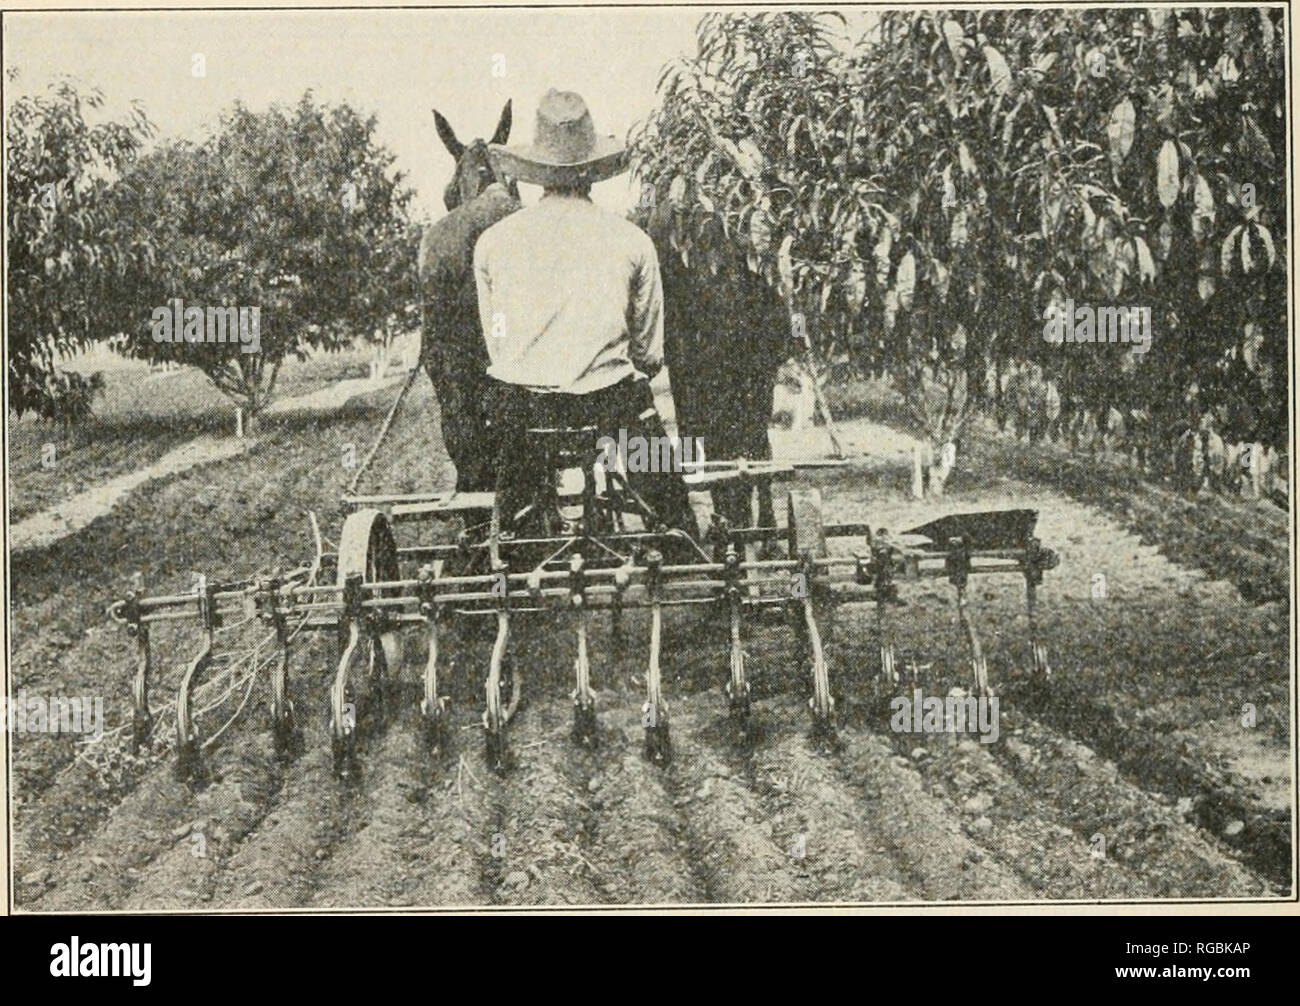 . Bulletin of the U.S. Department of Agriculture. Agriculture; Agriculture -- United States. 24 BULLETIN 162, U. S. DEPARTMENT OF AGRICULTURE. seed. Iii this respect it behaves in this locality not unlike the unadapted peach varieties. Trees of the Spanish group in the Mexican seedling peach orchard are relatively resistant to the soil difficulties and give every indica- tion of furnishing a better stock on which to work stone fruits than peaches of the unadapted type. This orchard is now being kept chiefly for the production of such seed, in order to supply desirable stocks for local peach pl Stock Photo